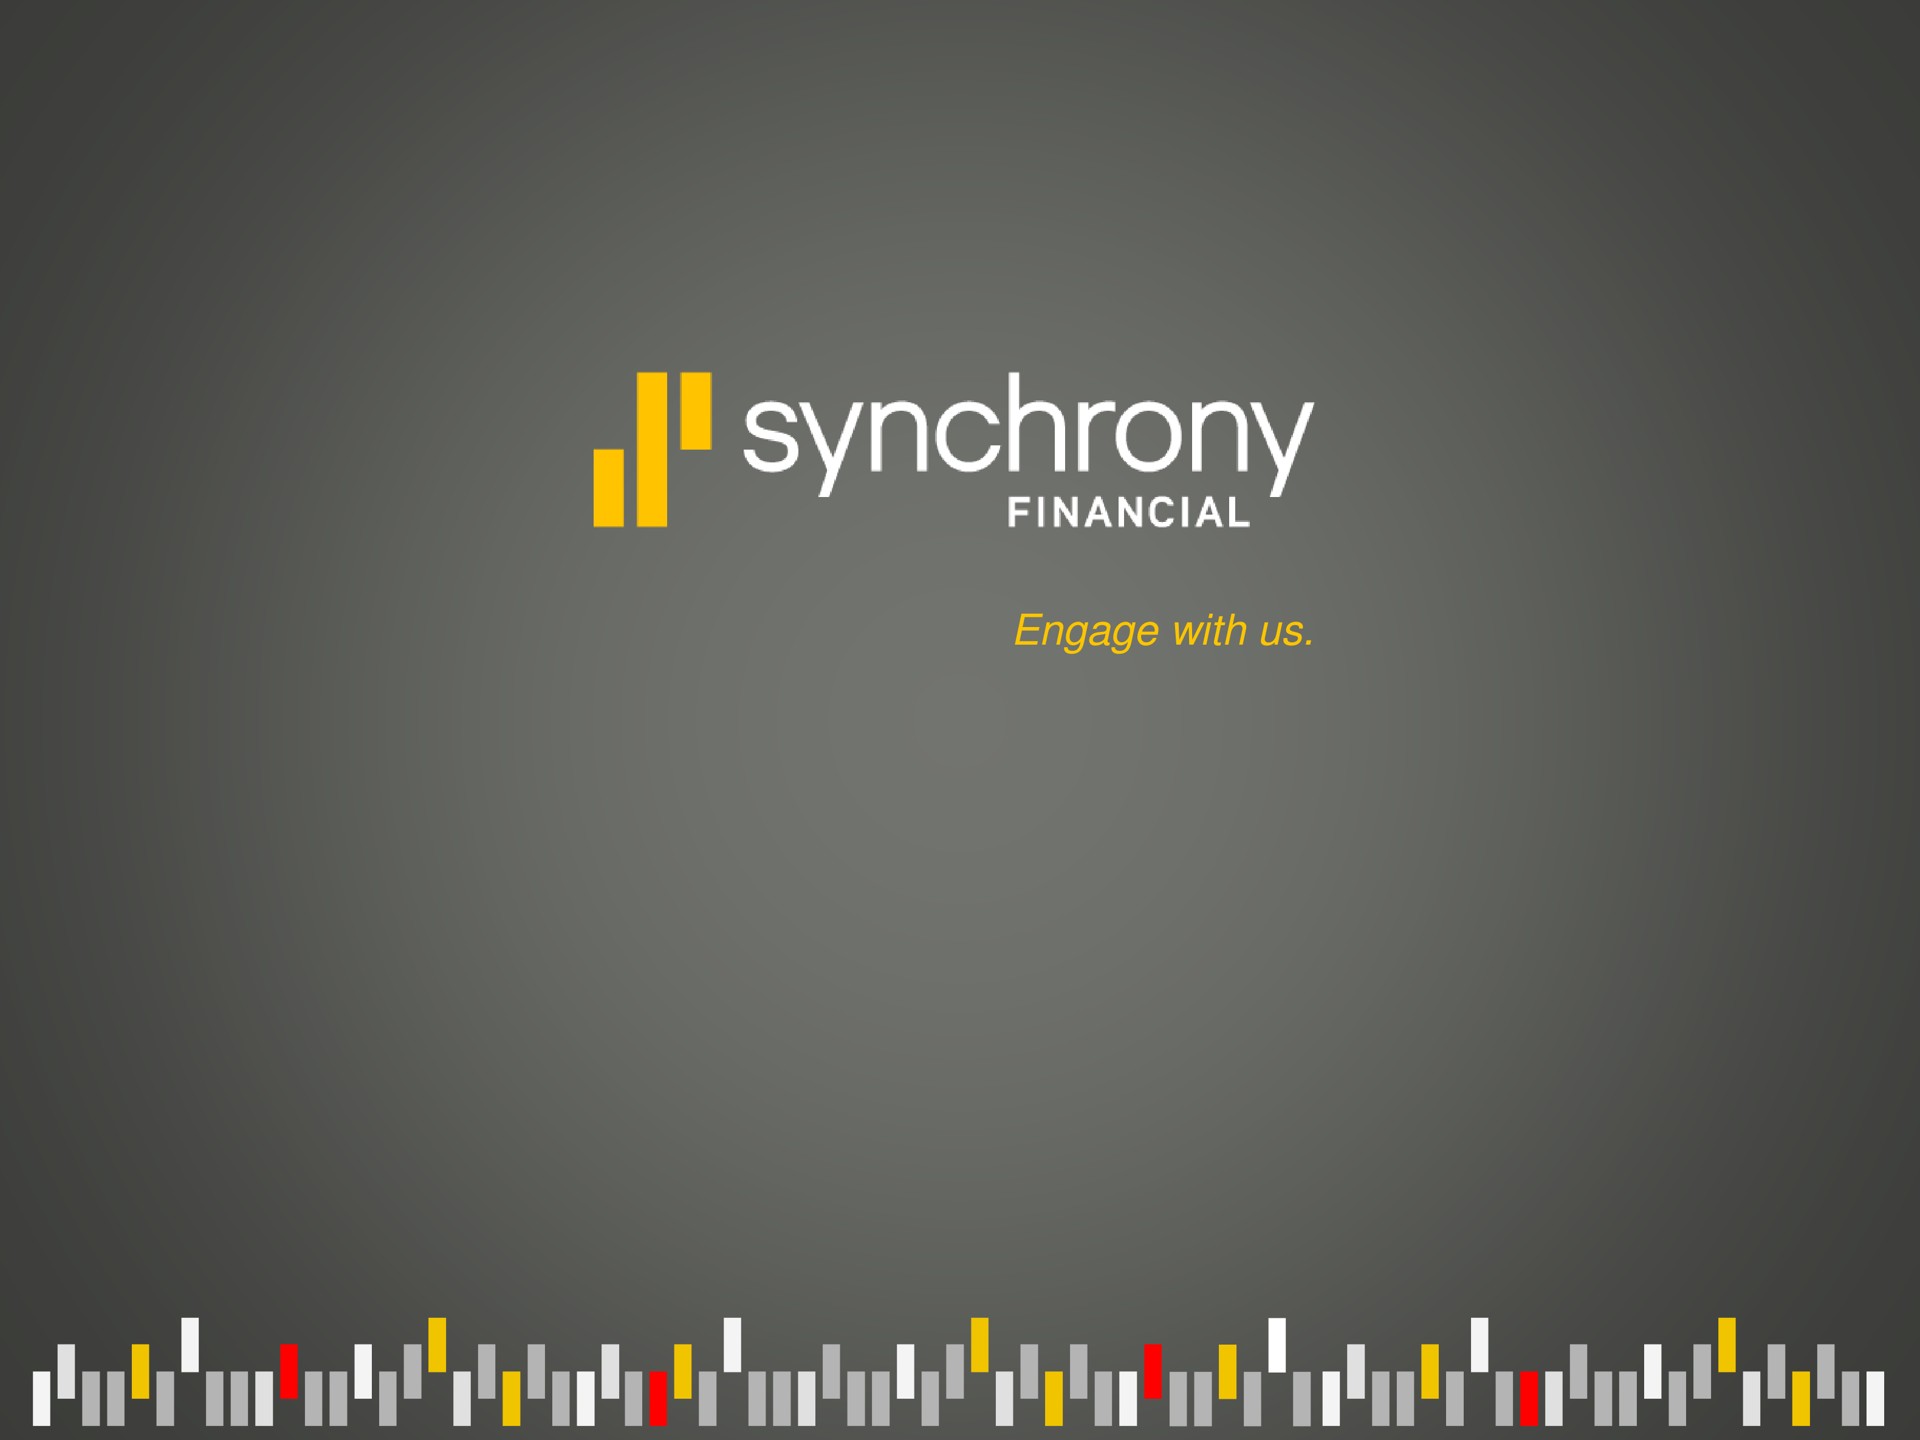 synchrony financial engage with us | Synchrony Financial